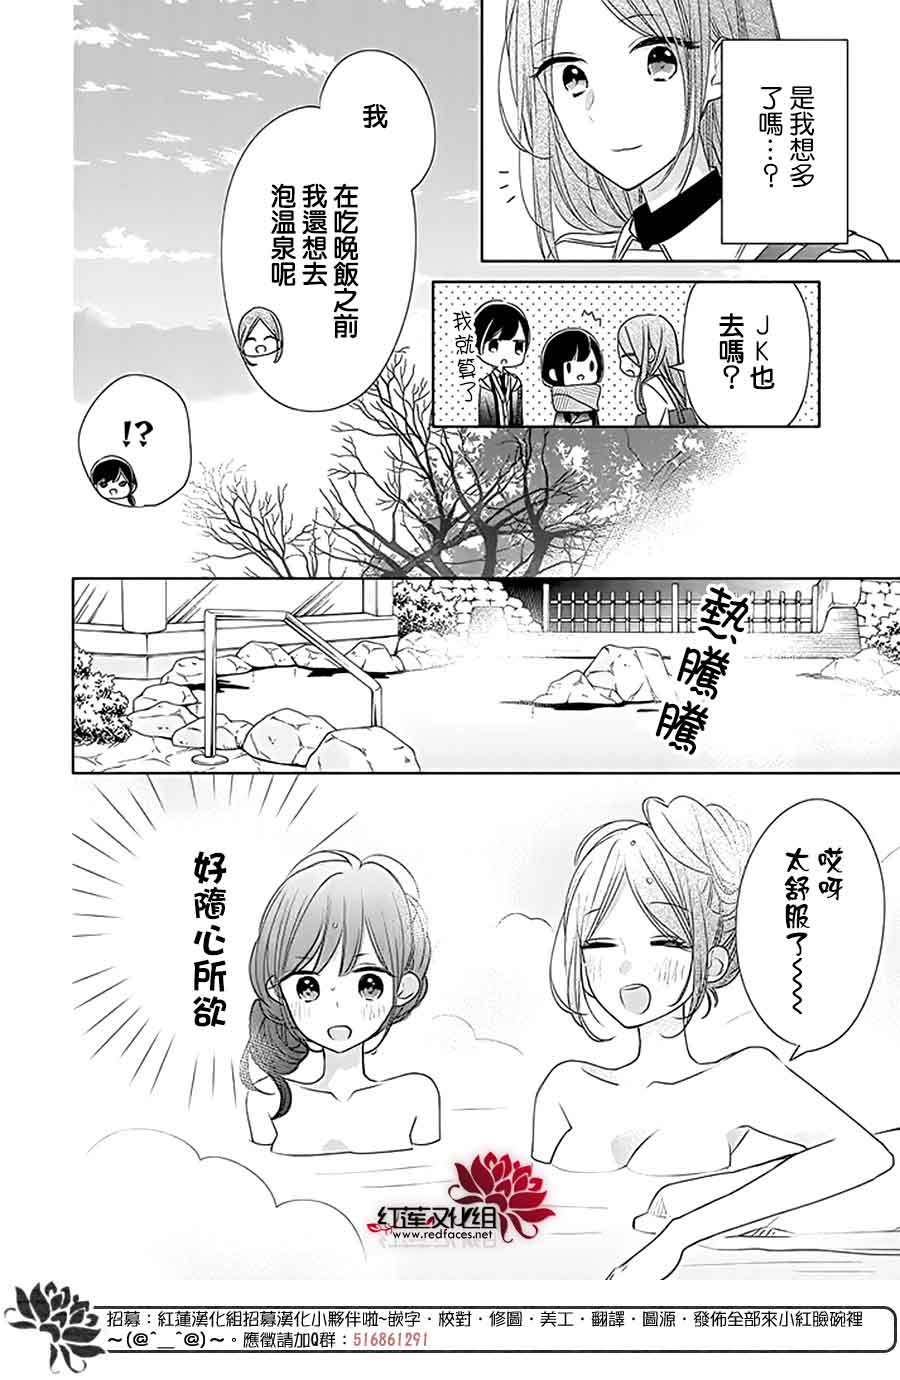 If given a second chance - 29话 - 6